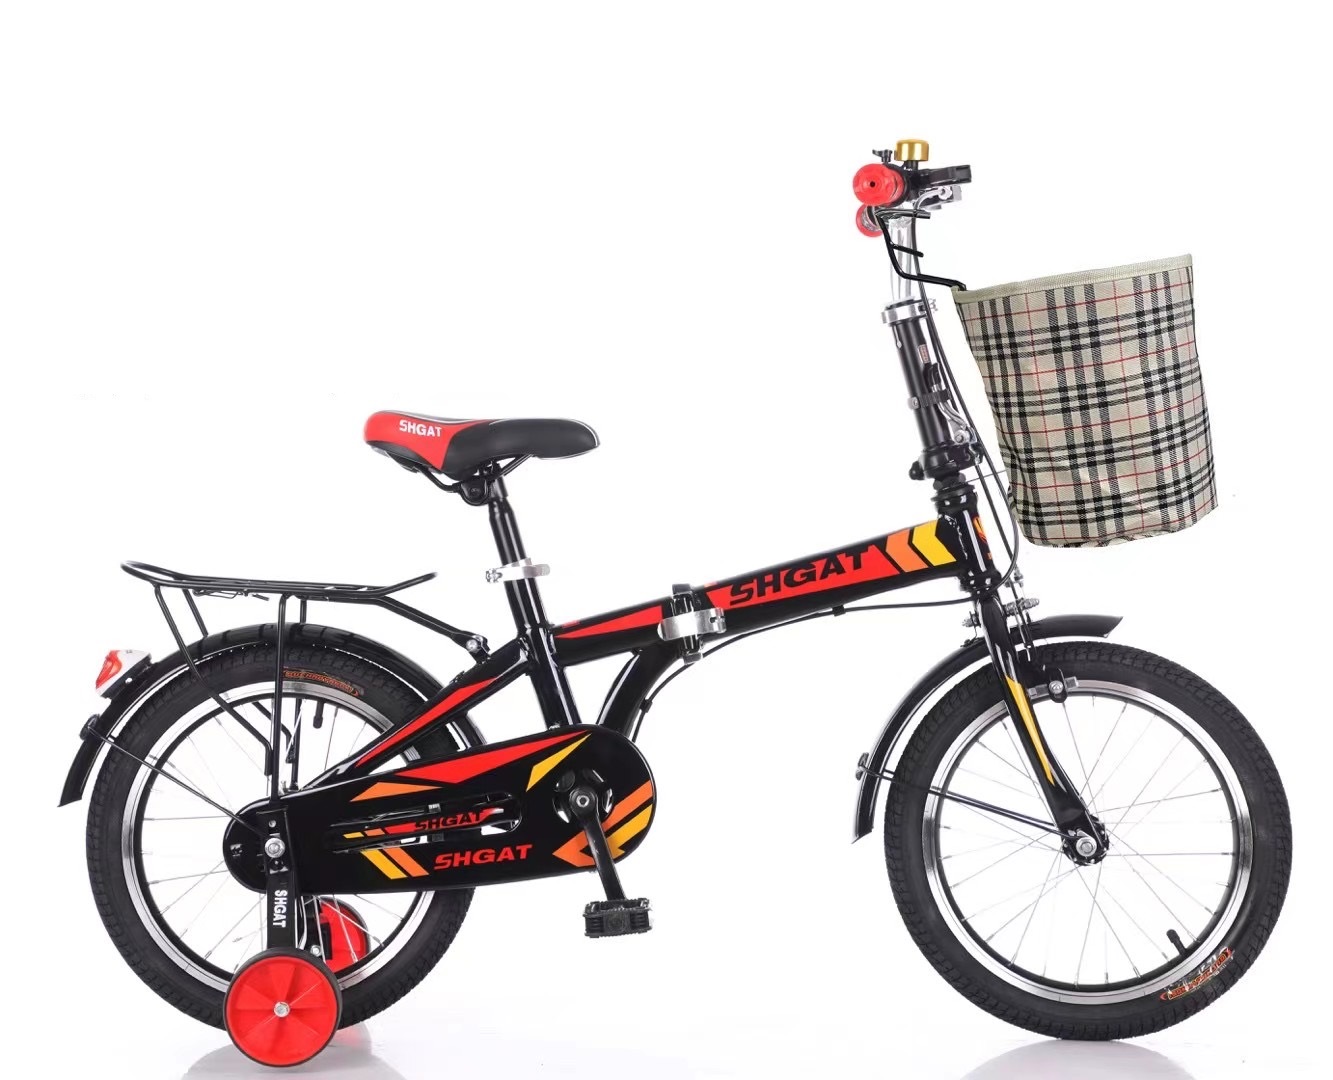 2021 New Style Folding Bicycle,popular color